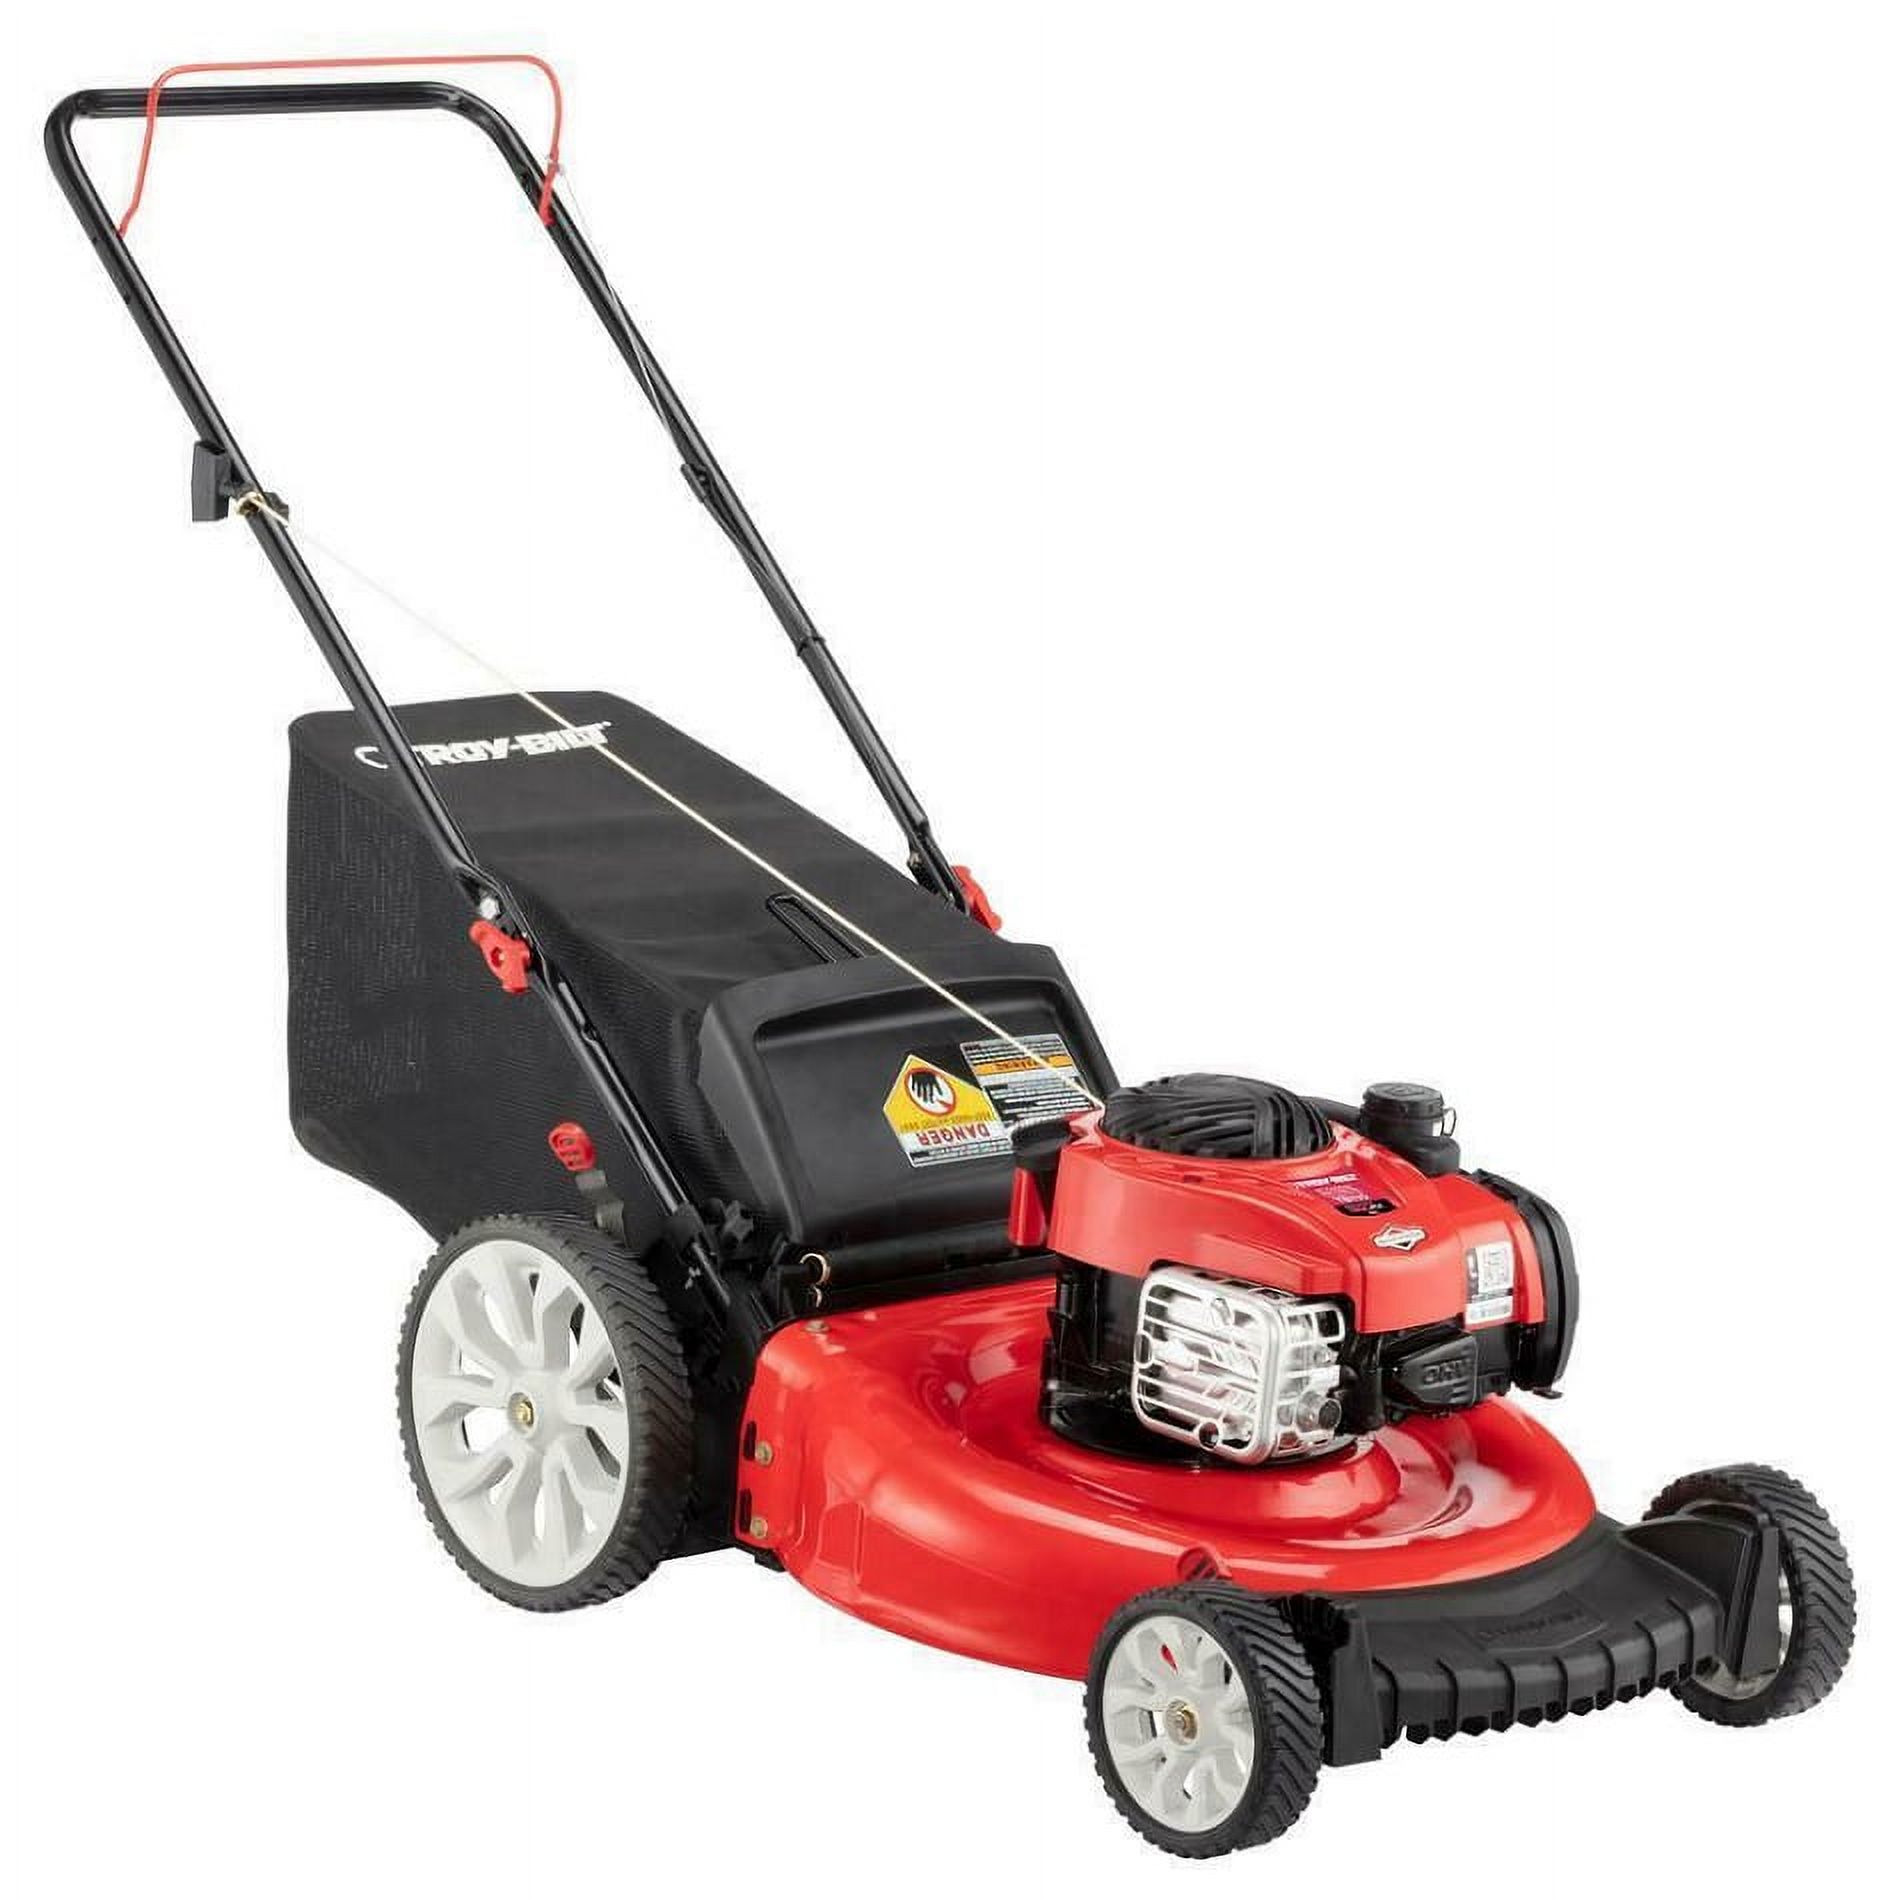 Troy-Bilt TB110 21-Inch Push Mower with 2-in-1 Triaction Cutting System, Briggs & Stratton 140cc engine - image 1 of 6